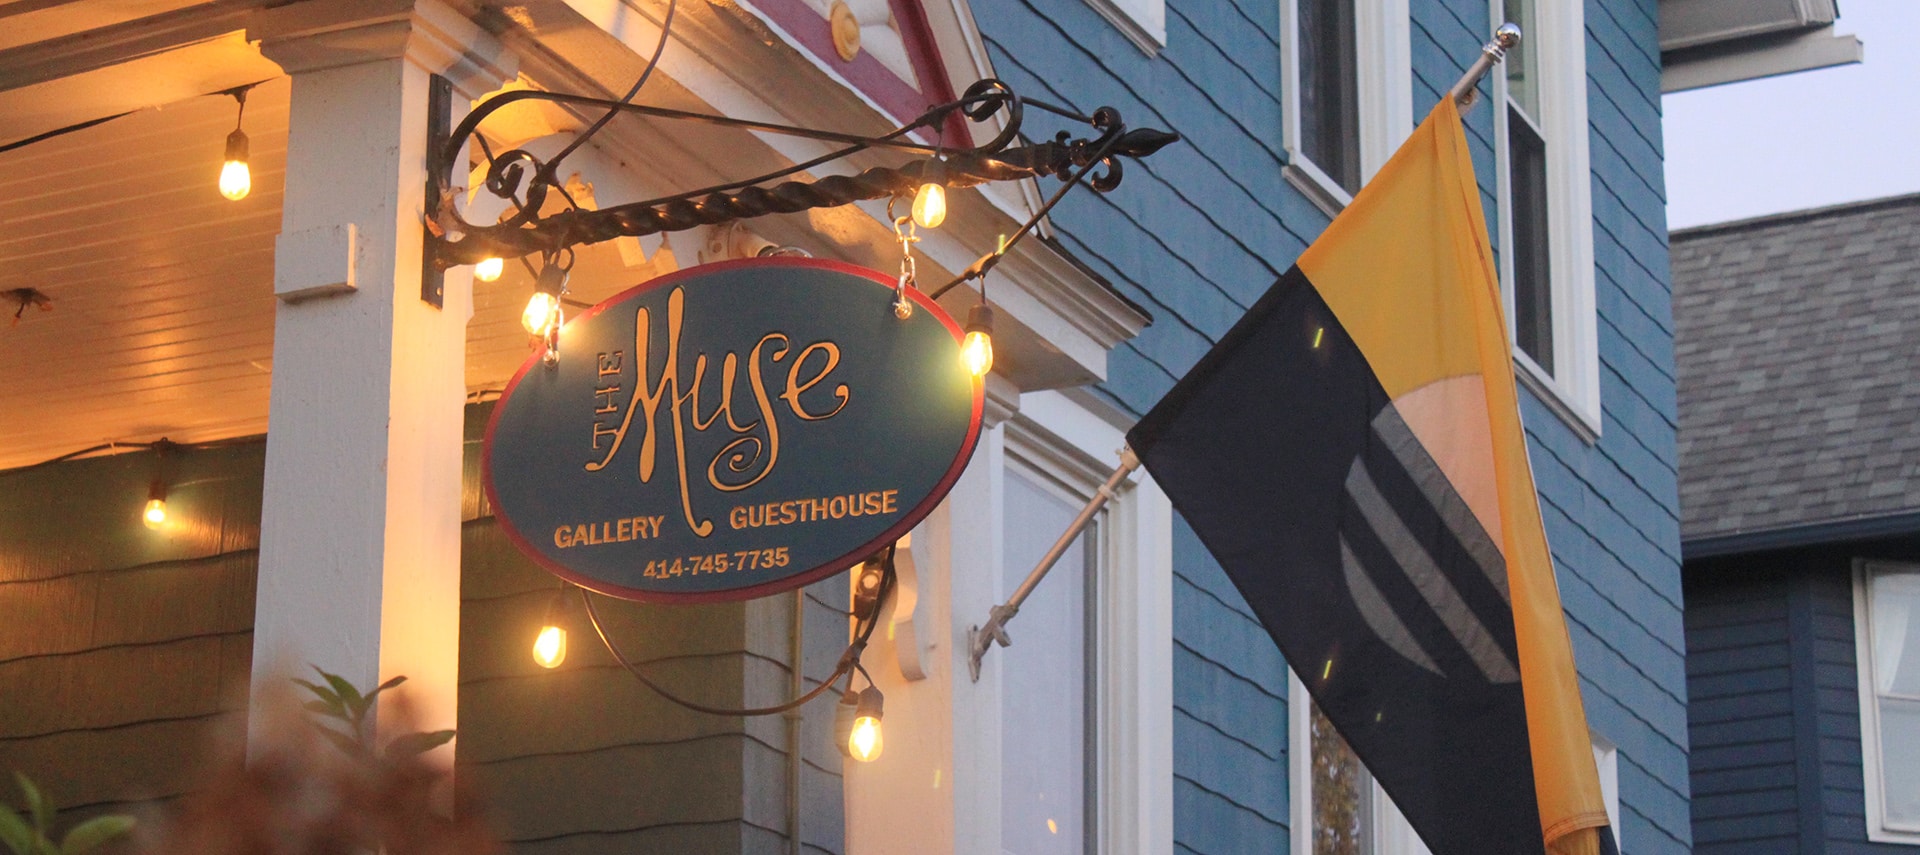 Detail of exterior front entrance with white string lights on white porch columns, a hanging carved sign that reads The Muse Gallery Guesthouse 414-745-7735 and the Milwaukee flag. Blue siding and white trim on the house.